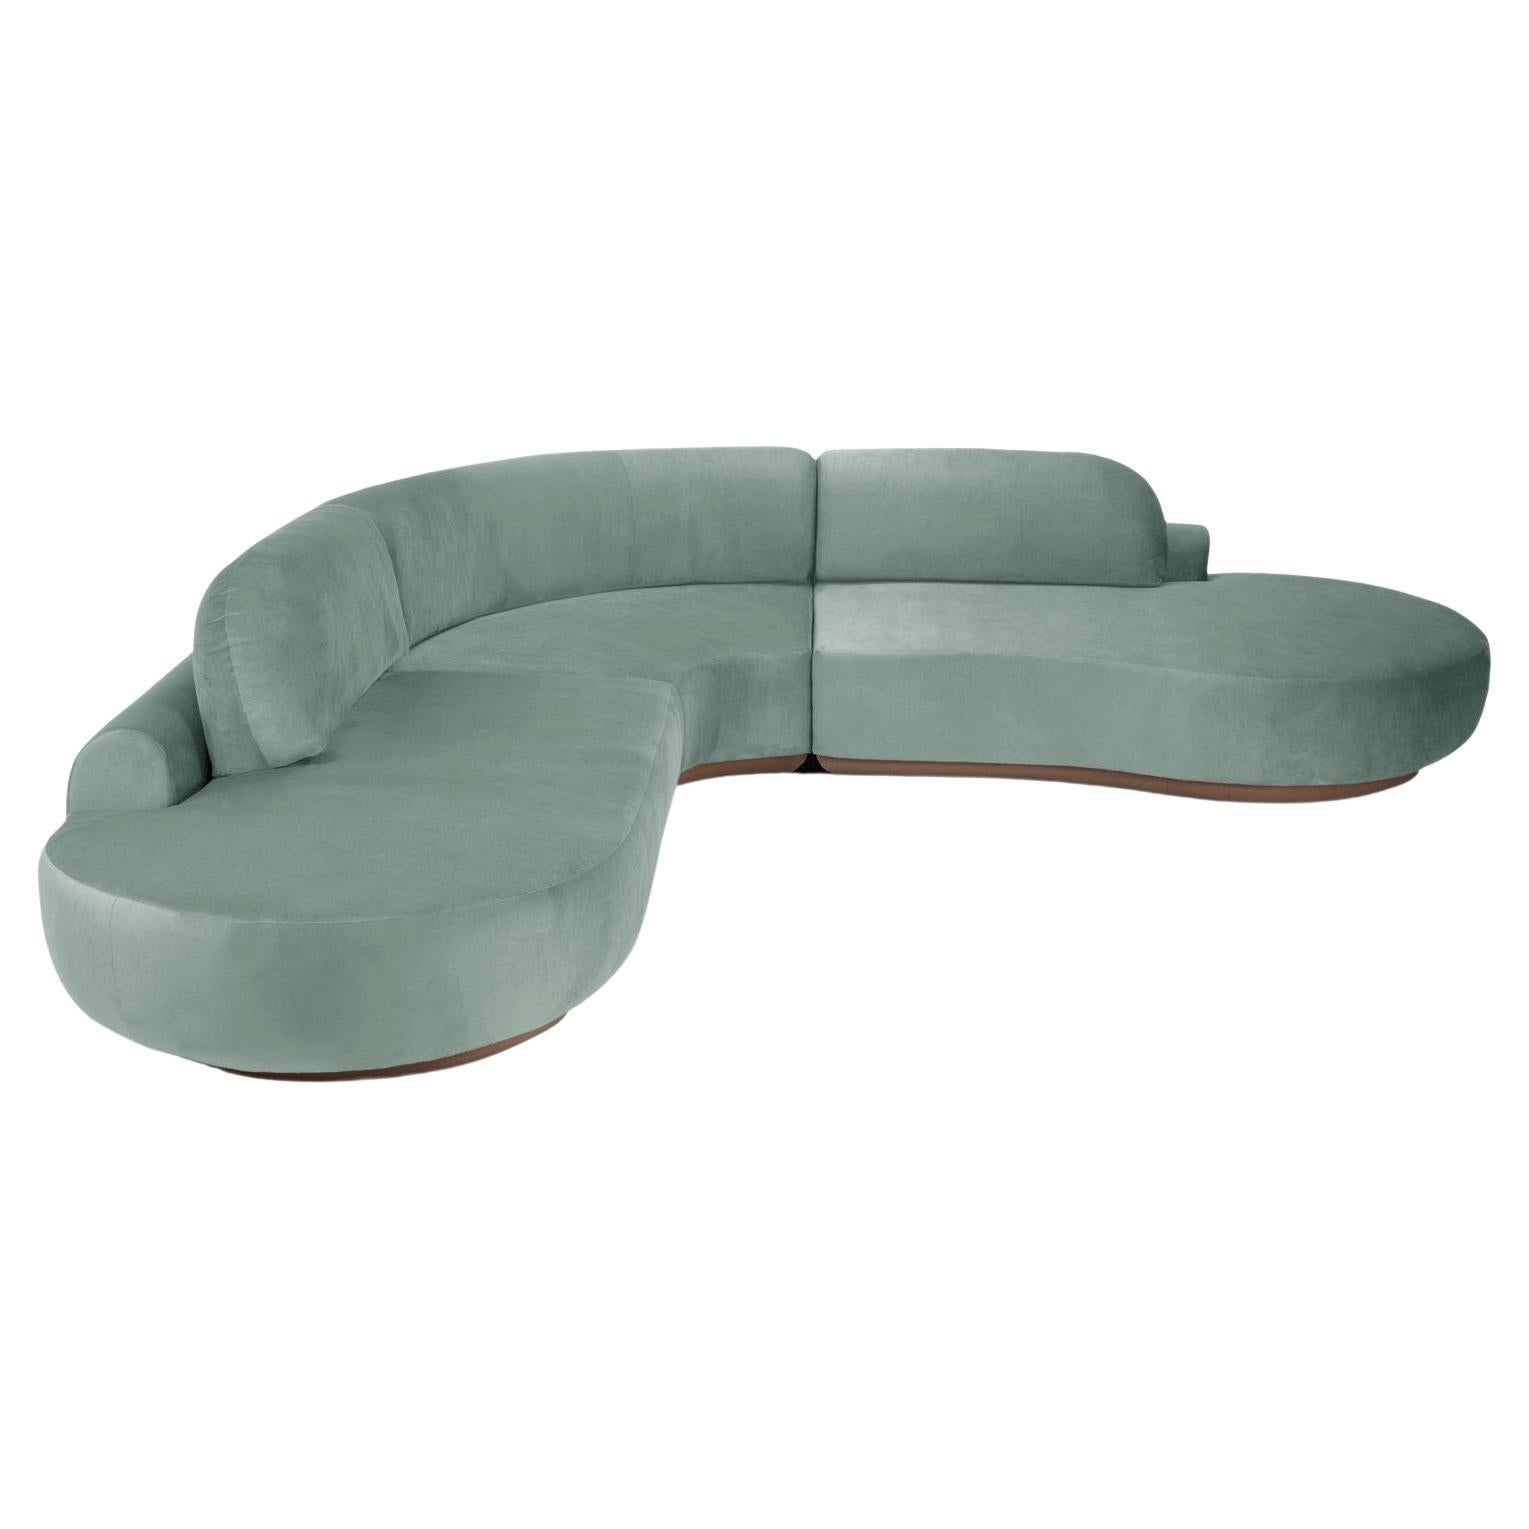 Naked Curved Sectional Sofa, 3 Piece with Beech Ash-056-1 and Smooth 60